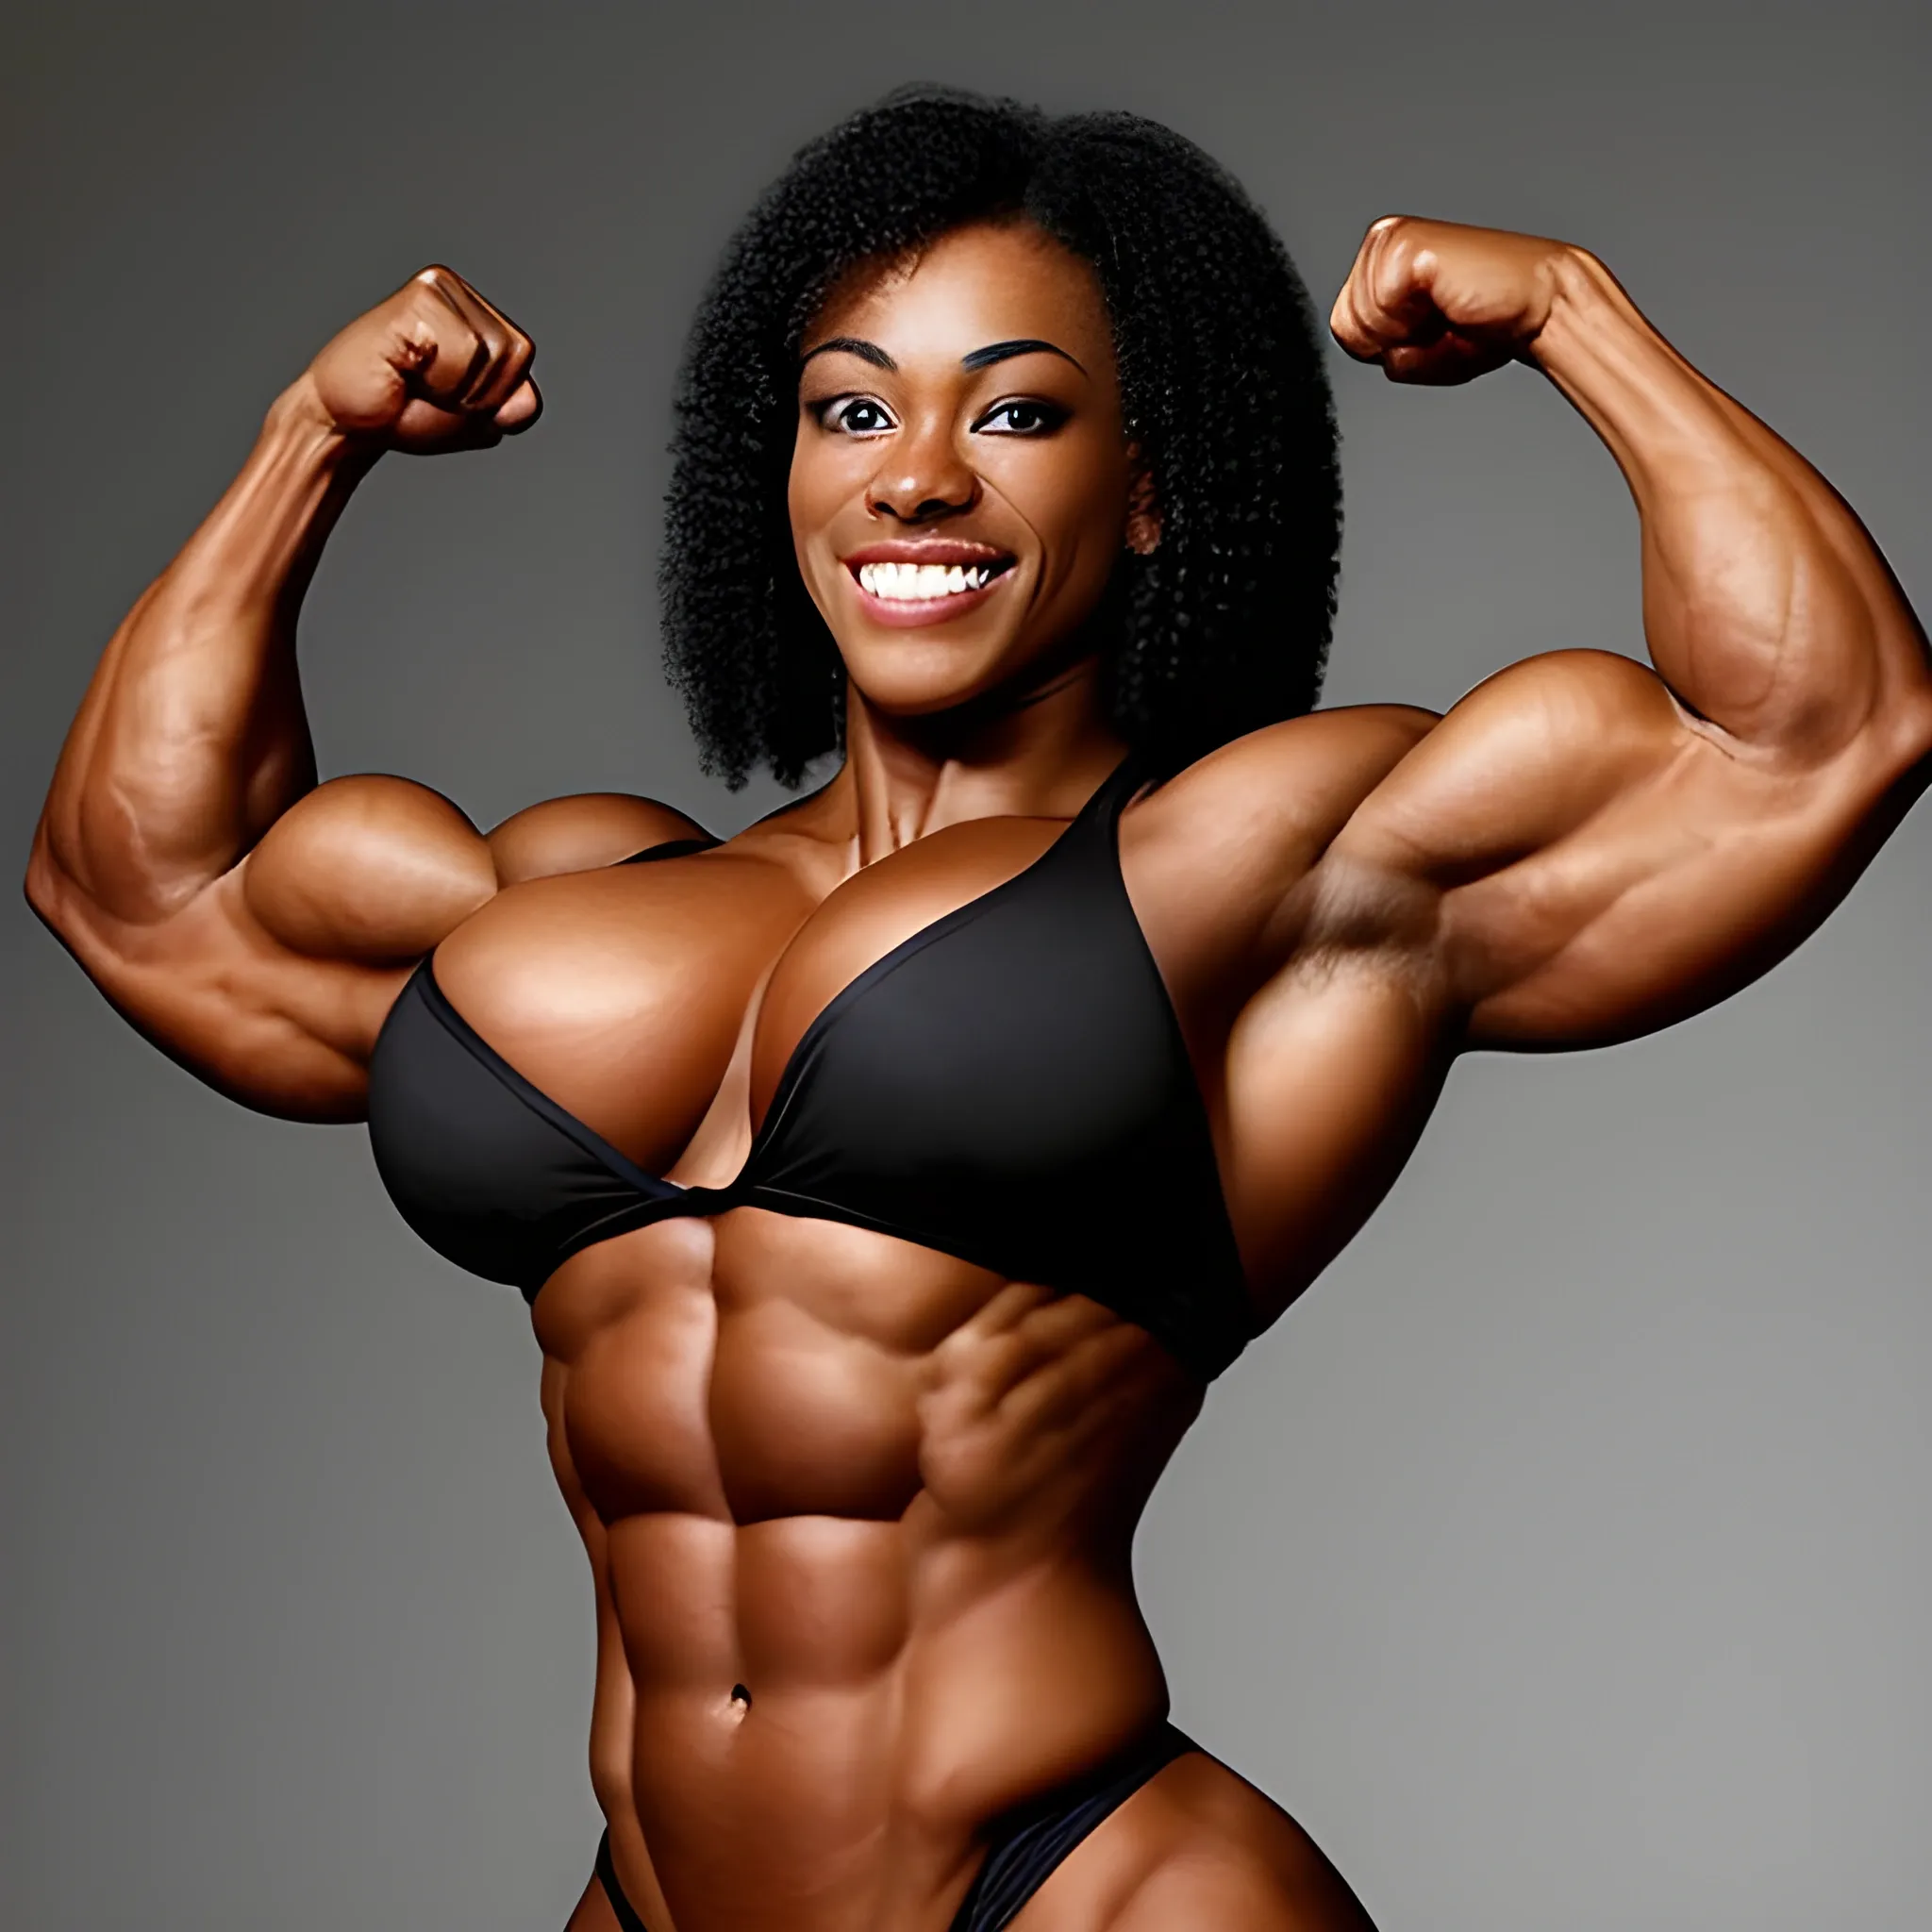 a triumphant heavyweight beautiful black black female bodybuilder with wide-set eyes with very narrow hips and waist, extremely muscular, extremely wide shoulder-to-shoulder distance over 240 cm, smiling, expressive eyes, ten-pack abs, perfect in every way, chesty musculature with big shoulders and big biceps.

